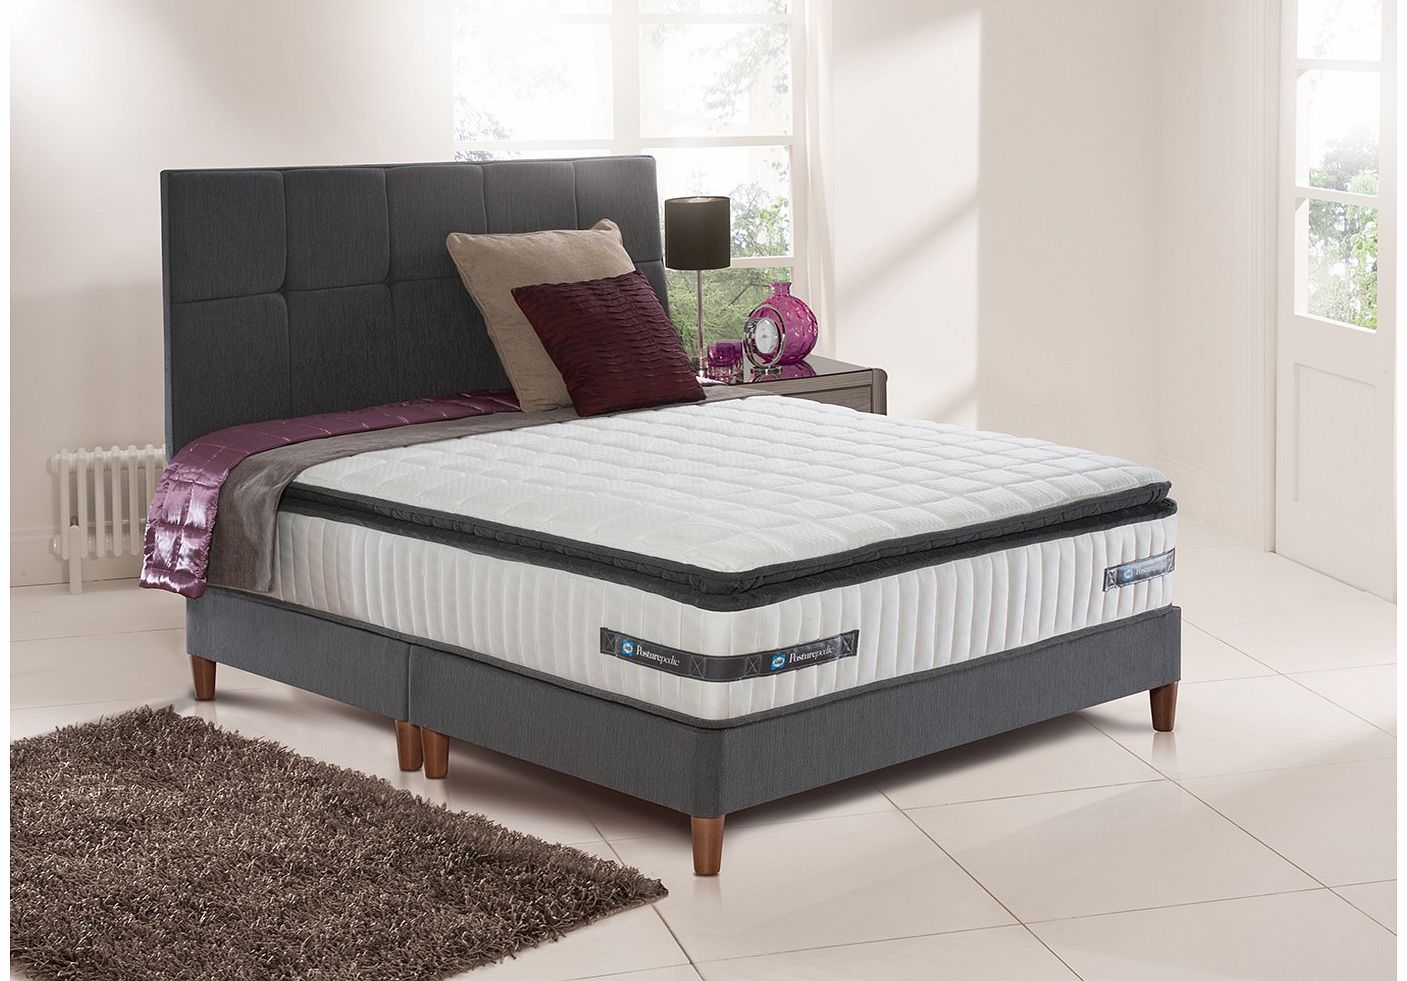 Sealy Rushton Pocket Spring Divan Bed with Legs